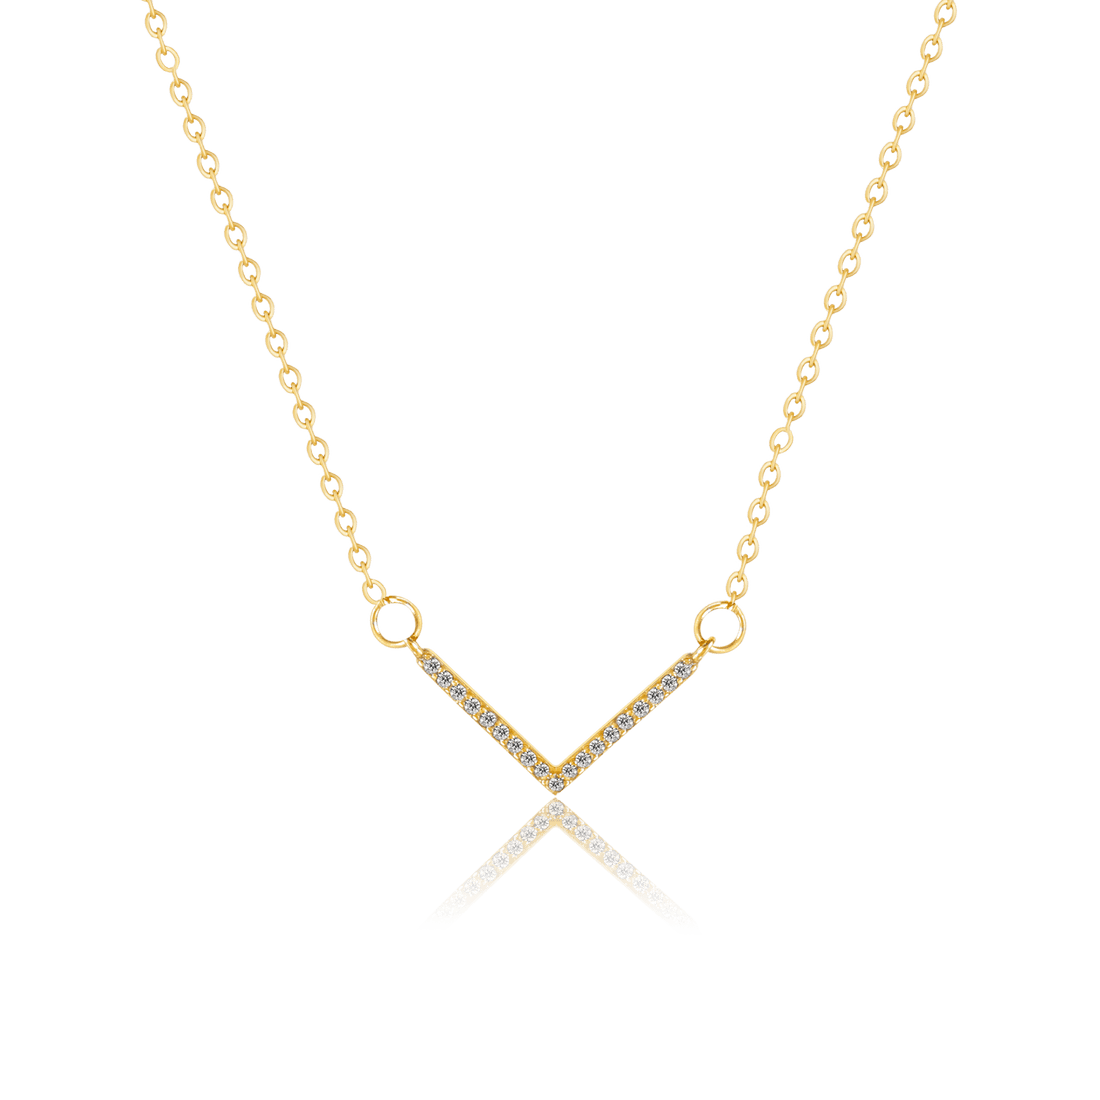 bianco rosso Necklaces Gold Strength Necklace cyprus greece jewelry gift free shipping europe worldwide